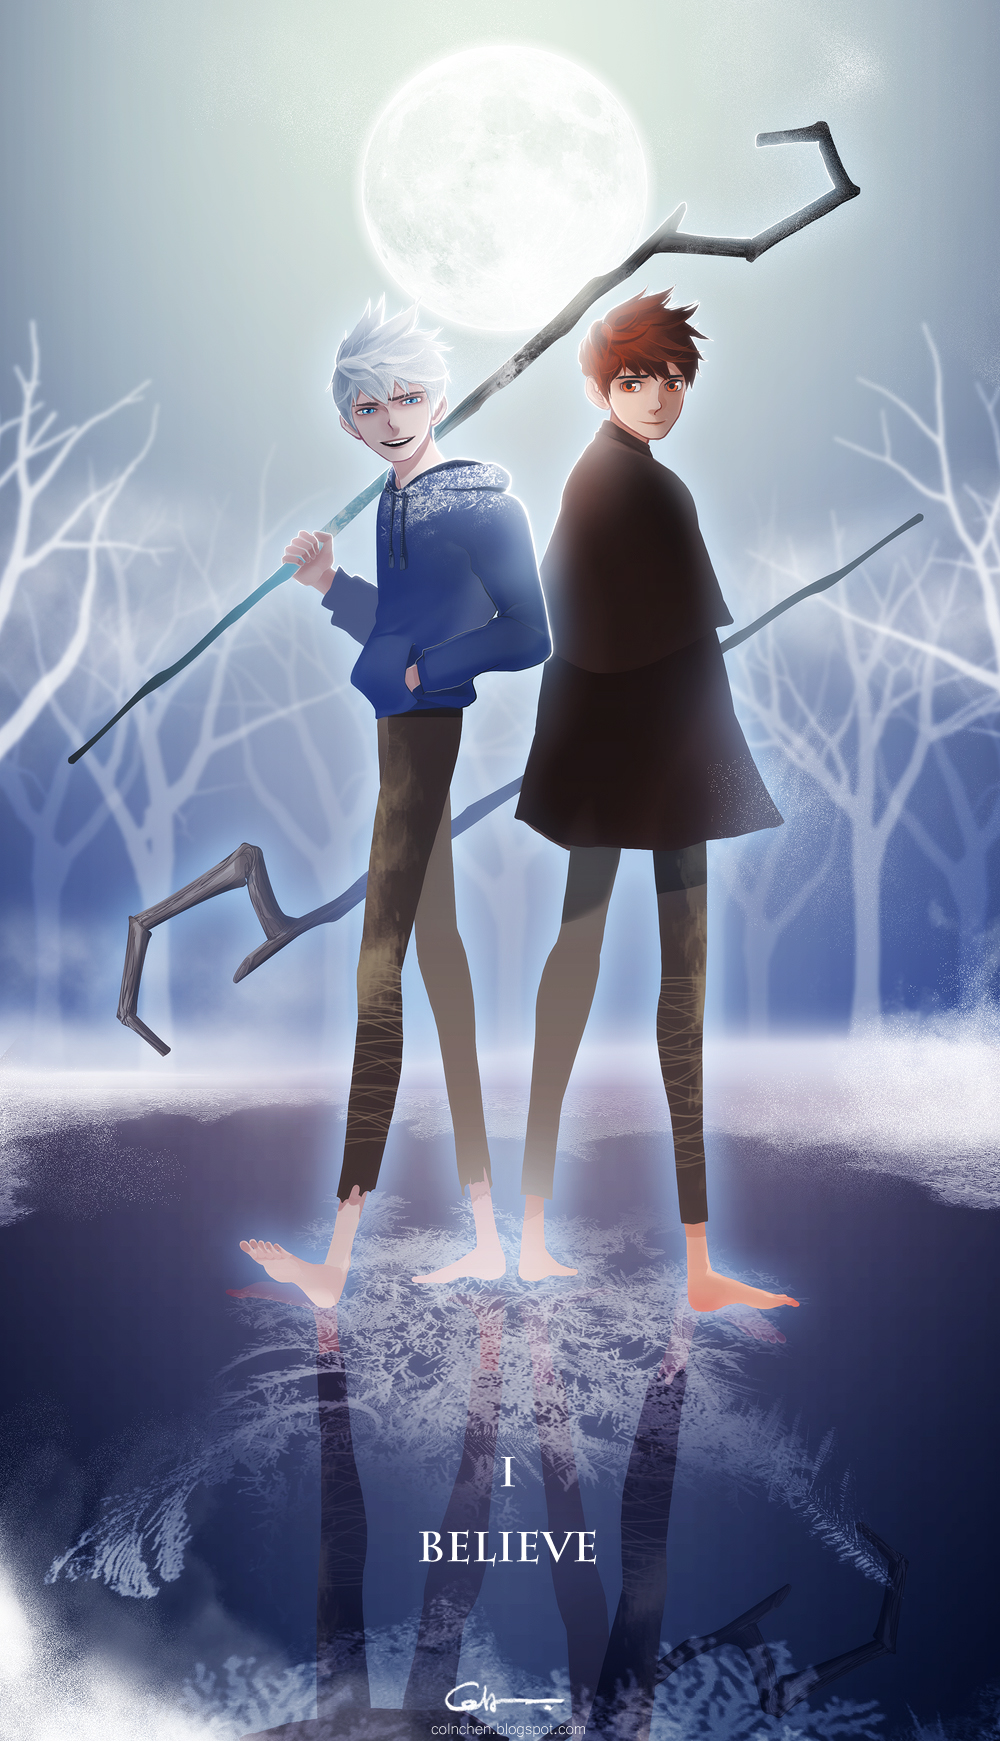 Jack Frost - Jack Frost The Guardian , HD Wallpaper & Backgrounds